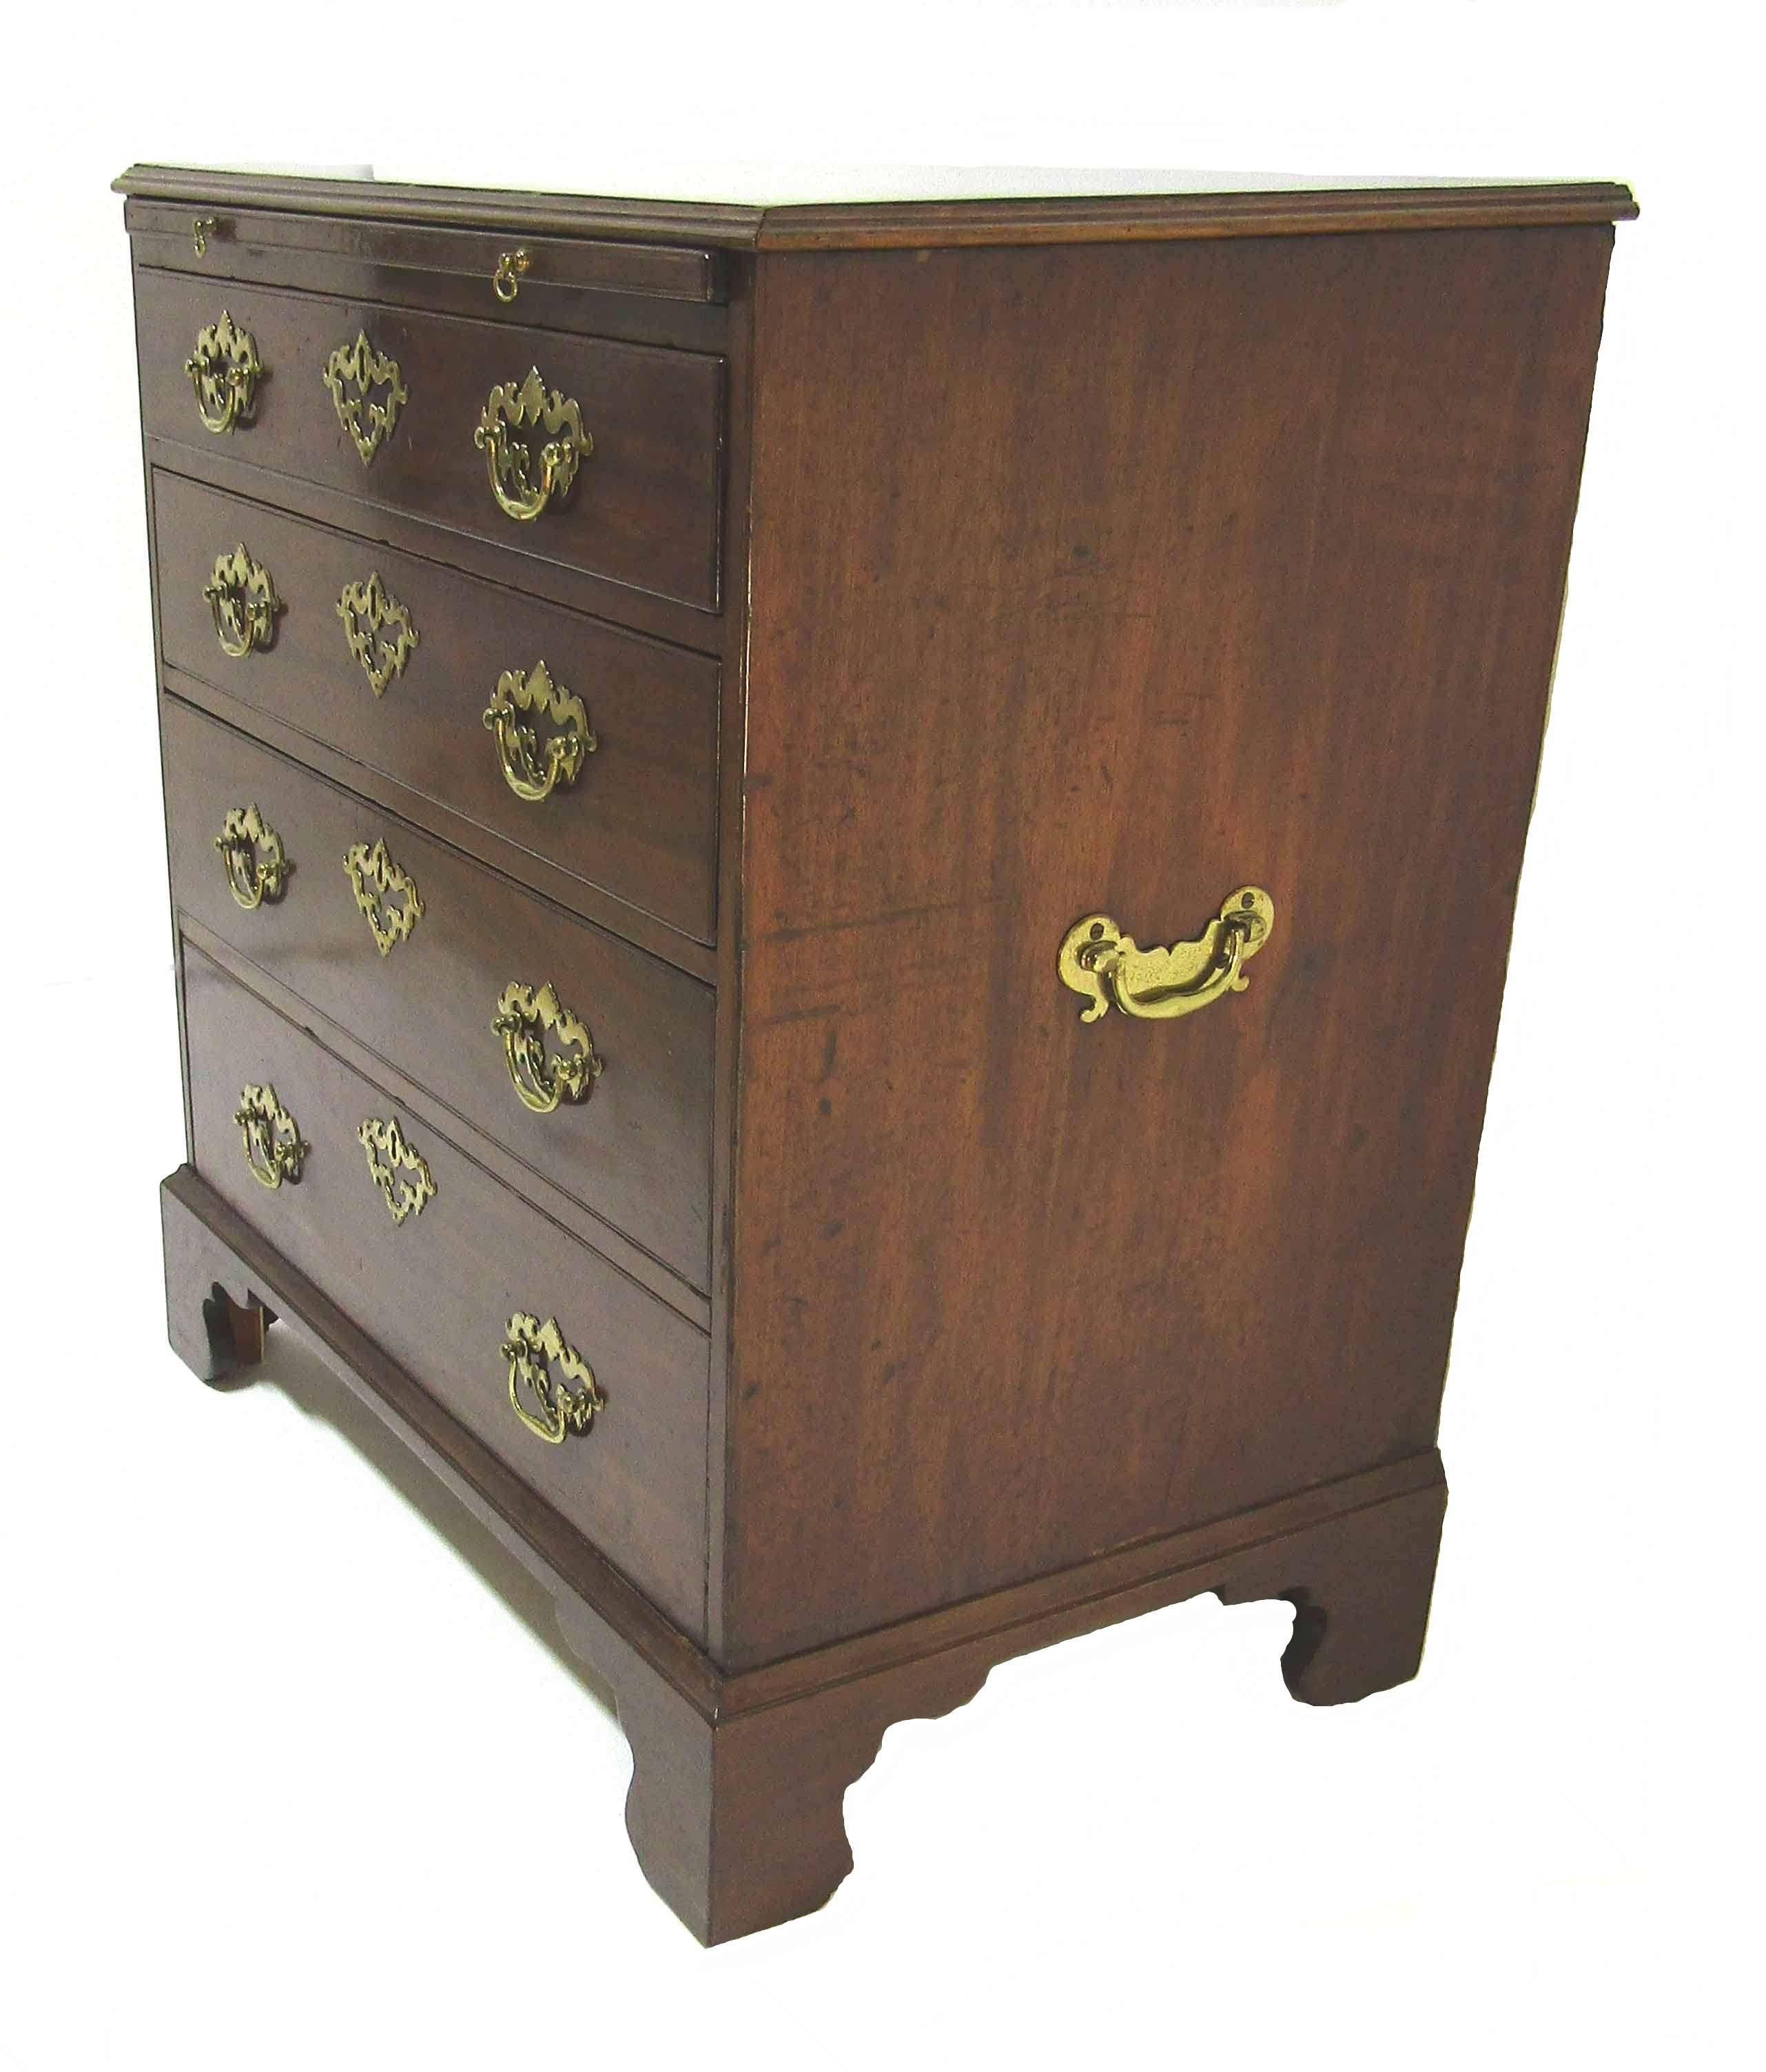 Fine Antique English George III Period Chippendale Mahogany Bachelor's Chest In Good Condition For Sale In Houston, TX